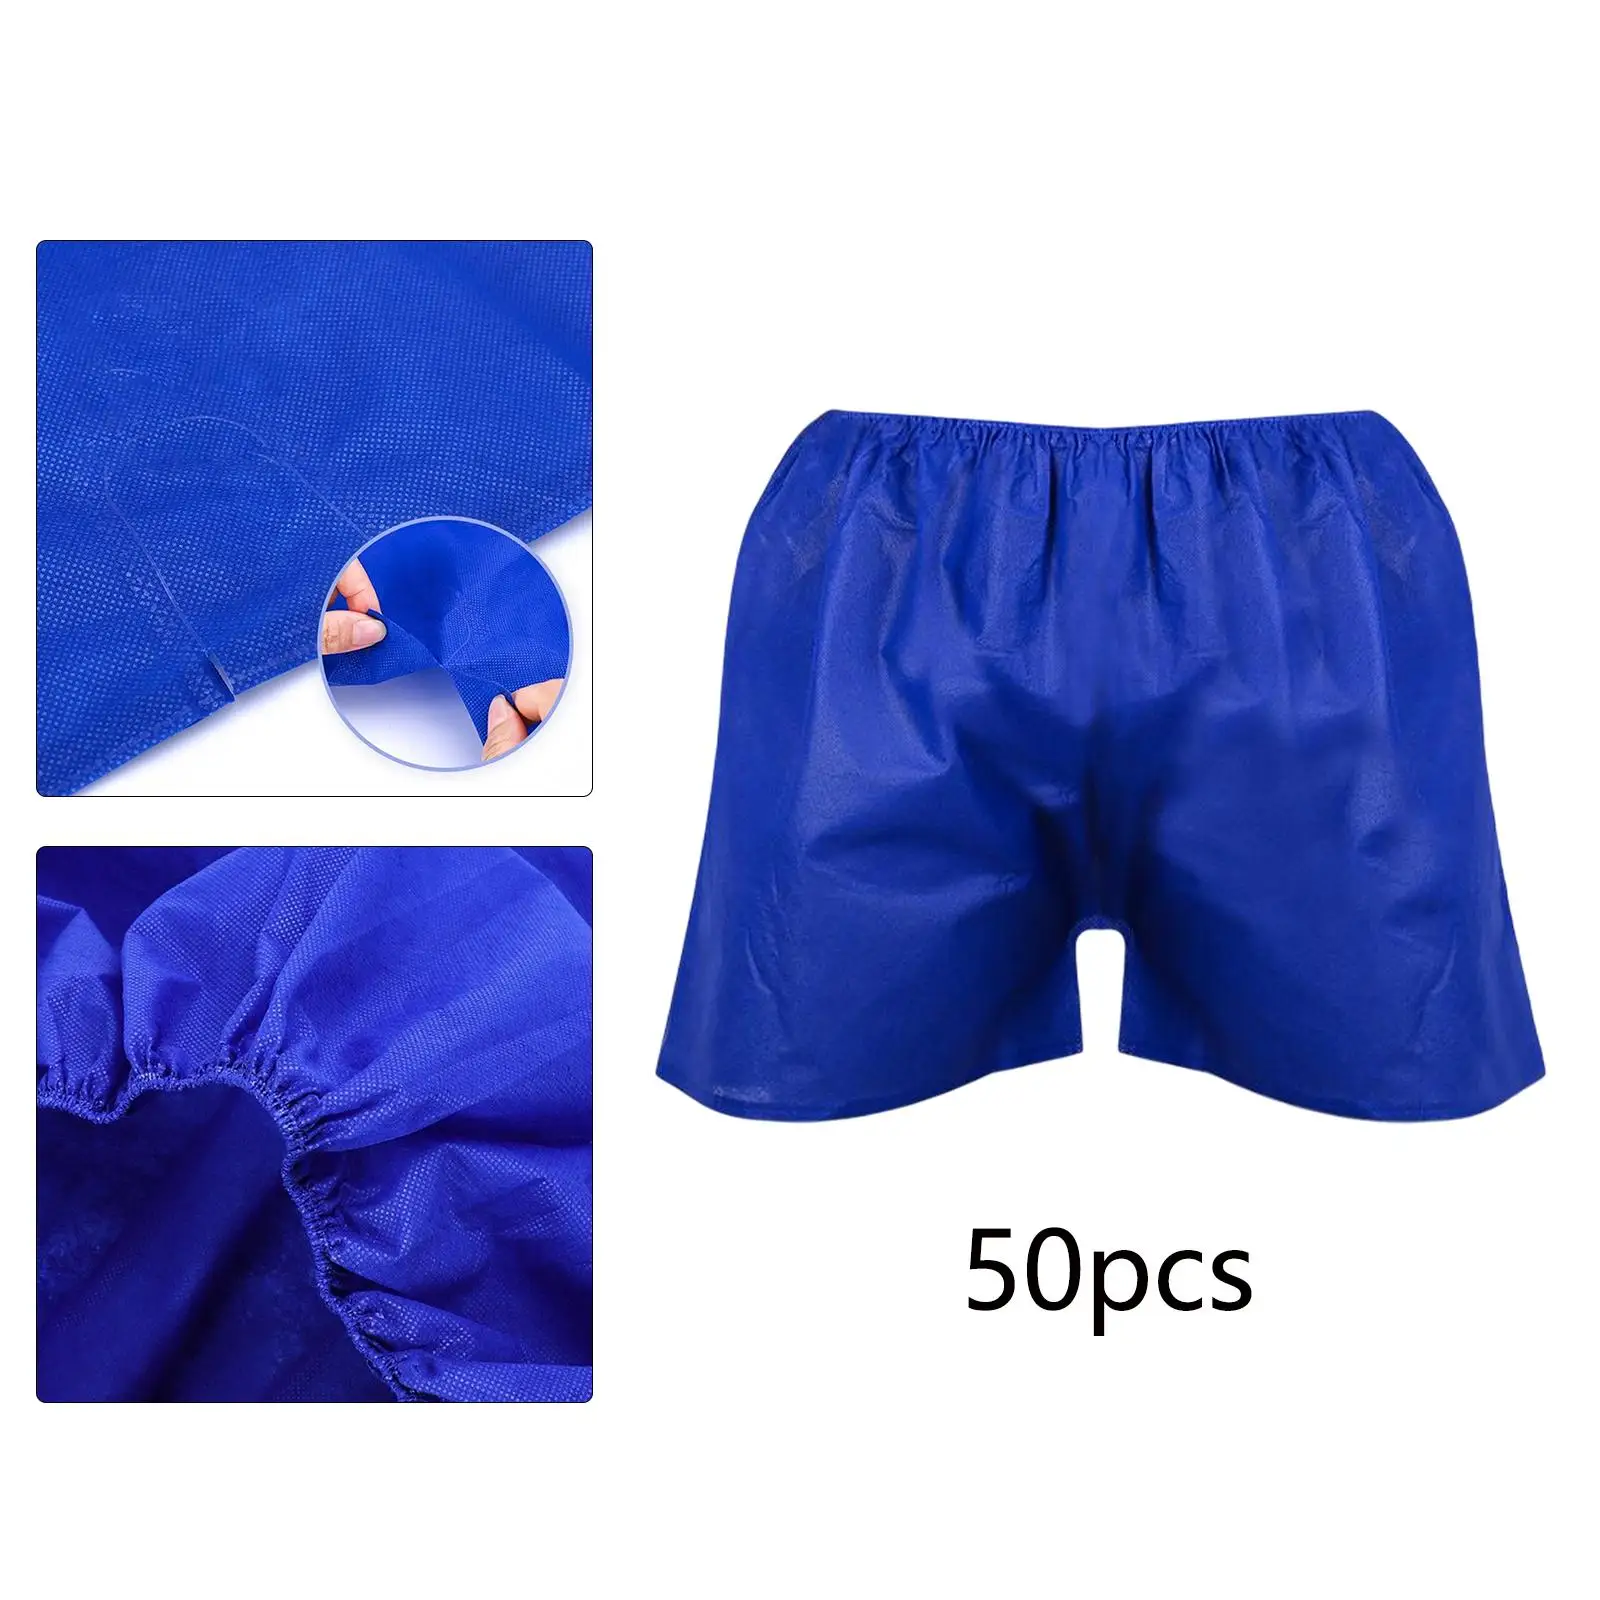 Men`s Boxer Shorts Panties Professional Nonwoven Adjustable Underwear Underpants for spa Male Camping